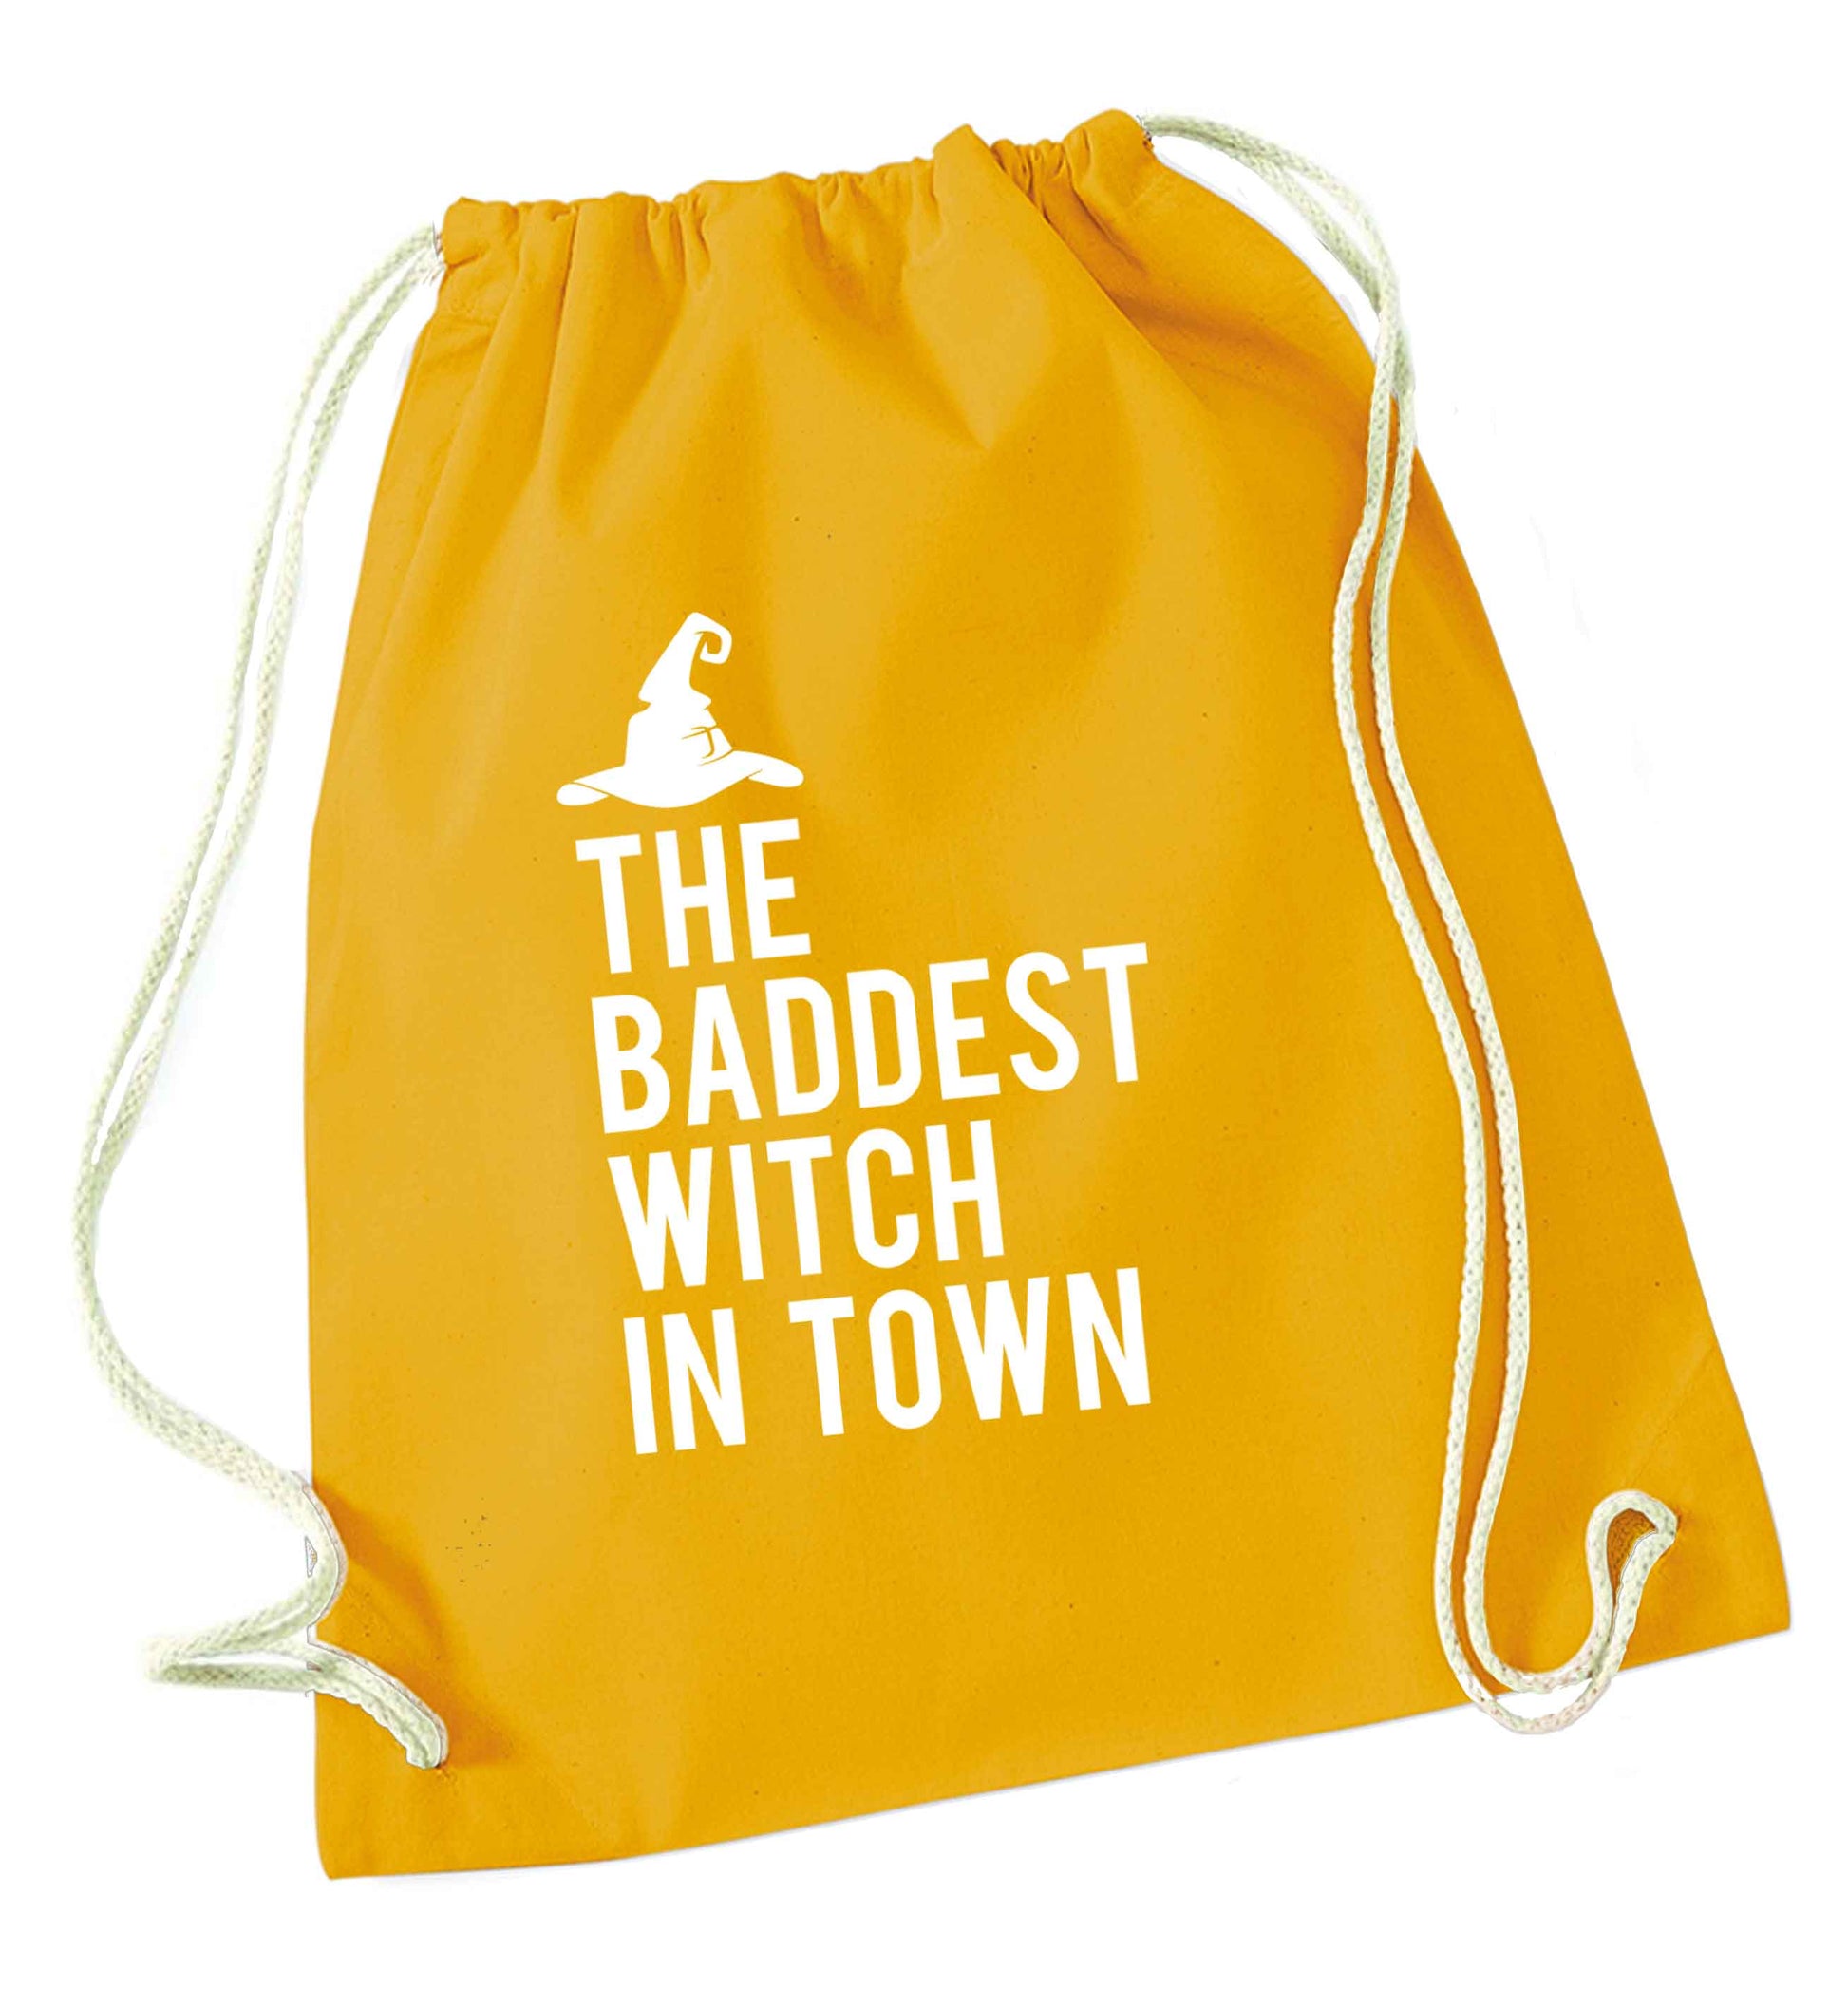 Badest witch in town mustard drawstring bag